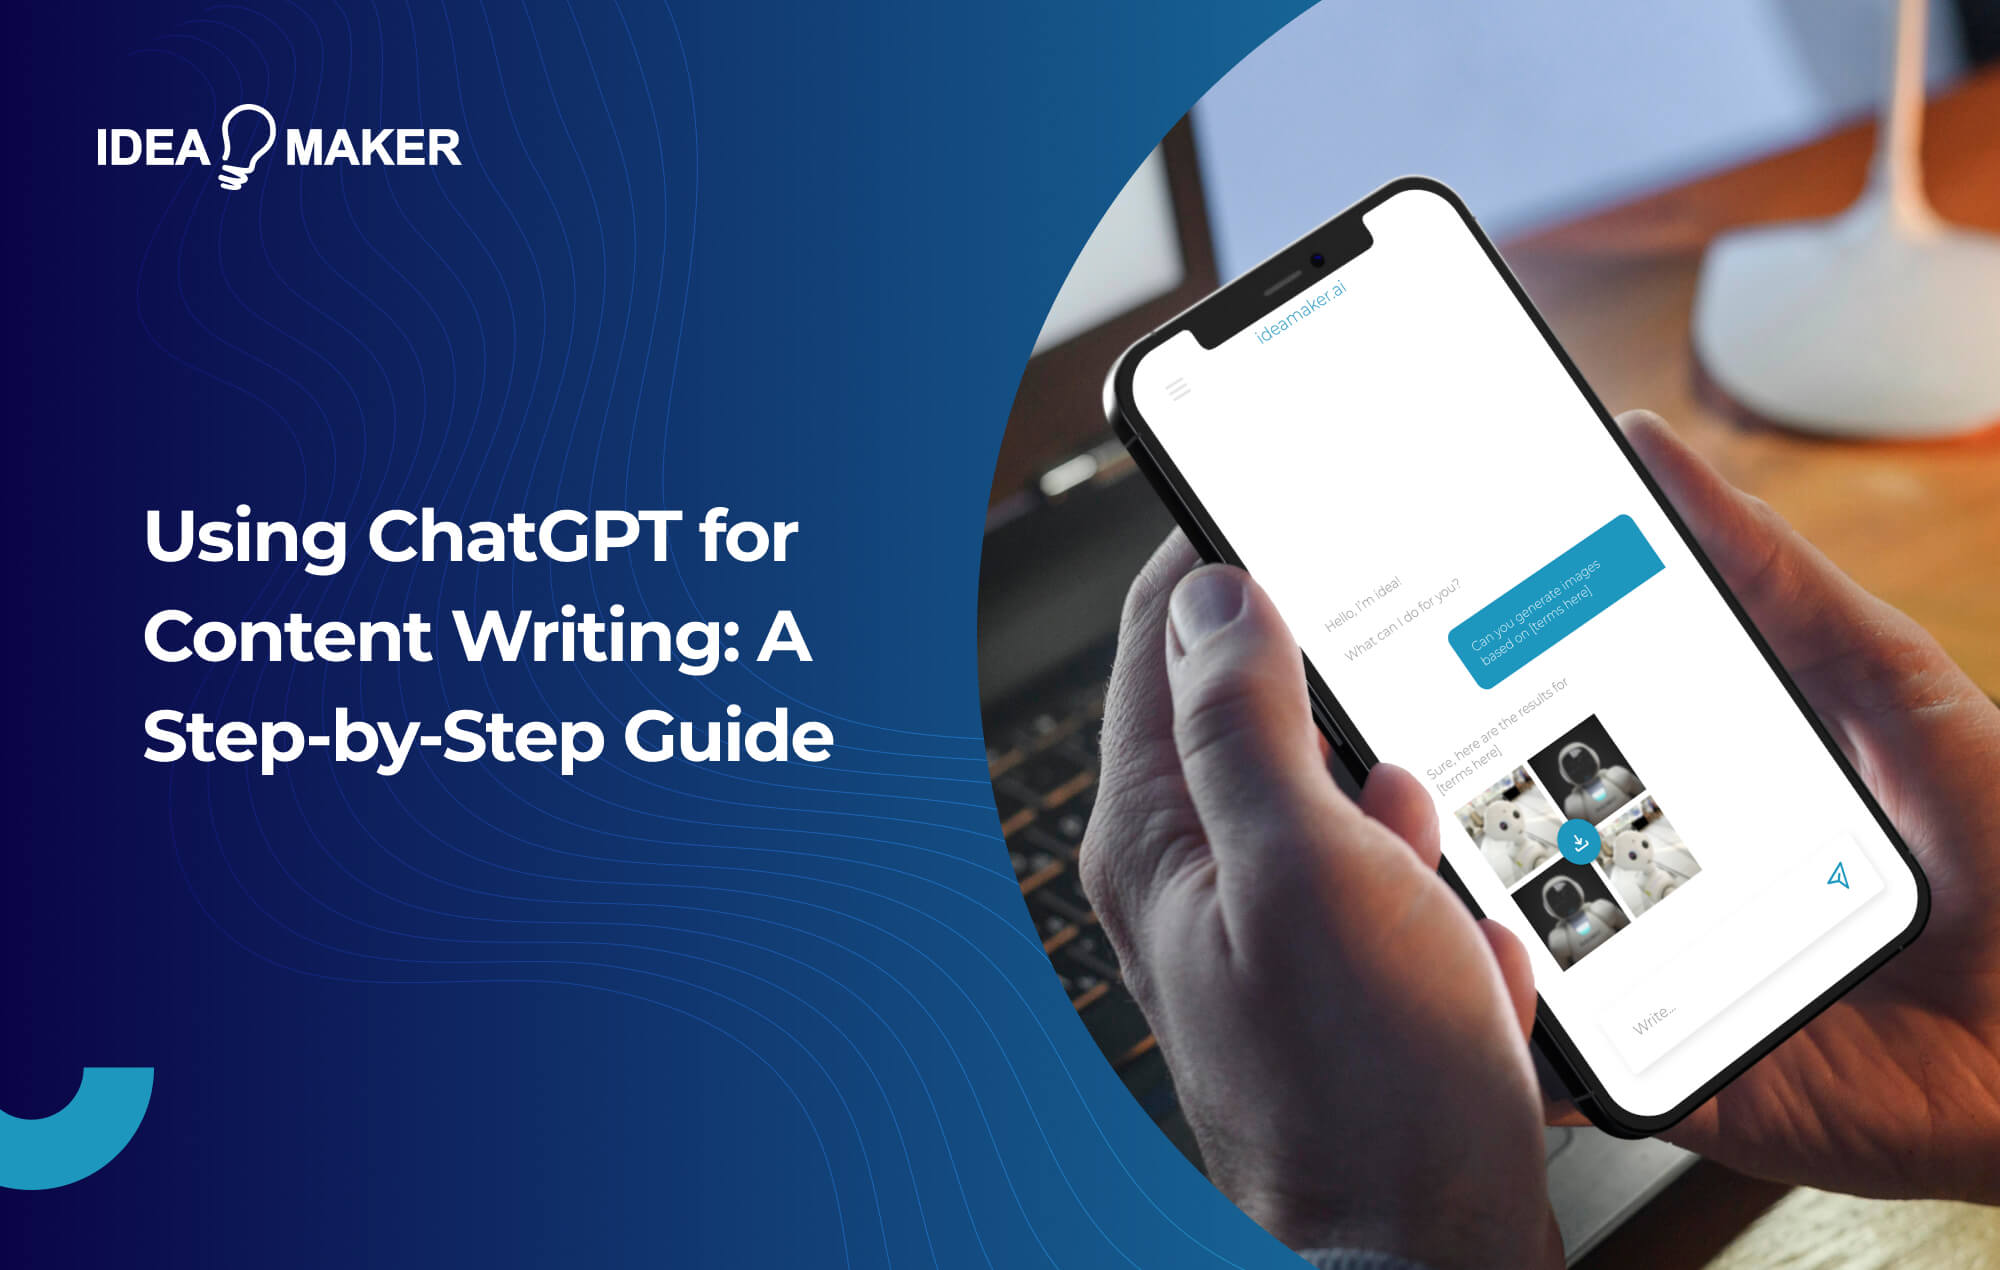 Ideamaker - Using ChatGPT for Content Writing_ A Step-by-Step Guide